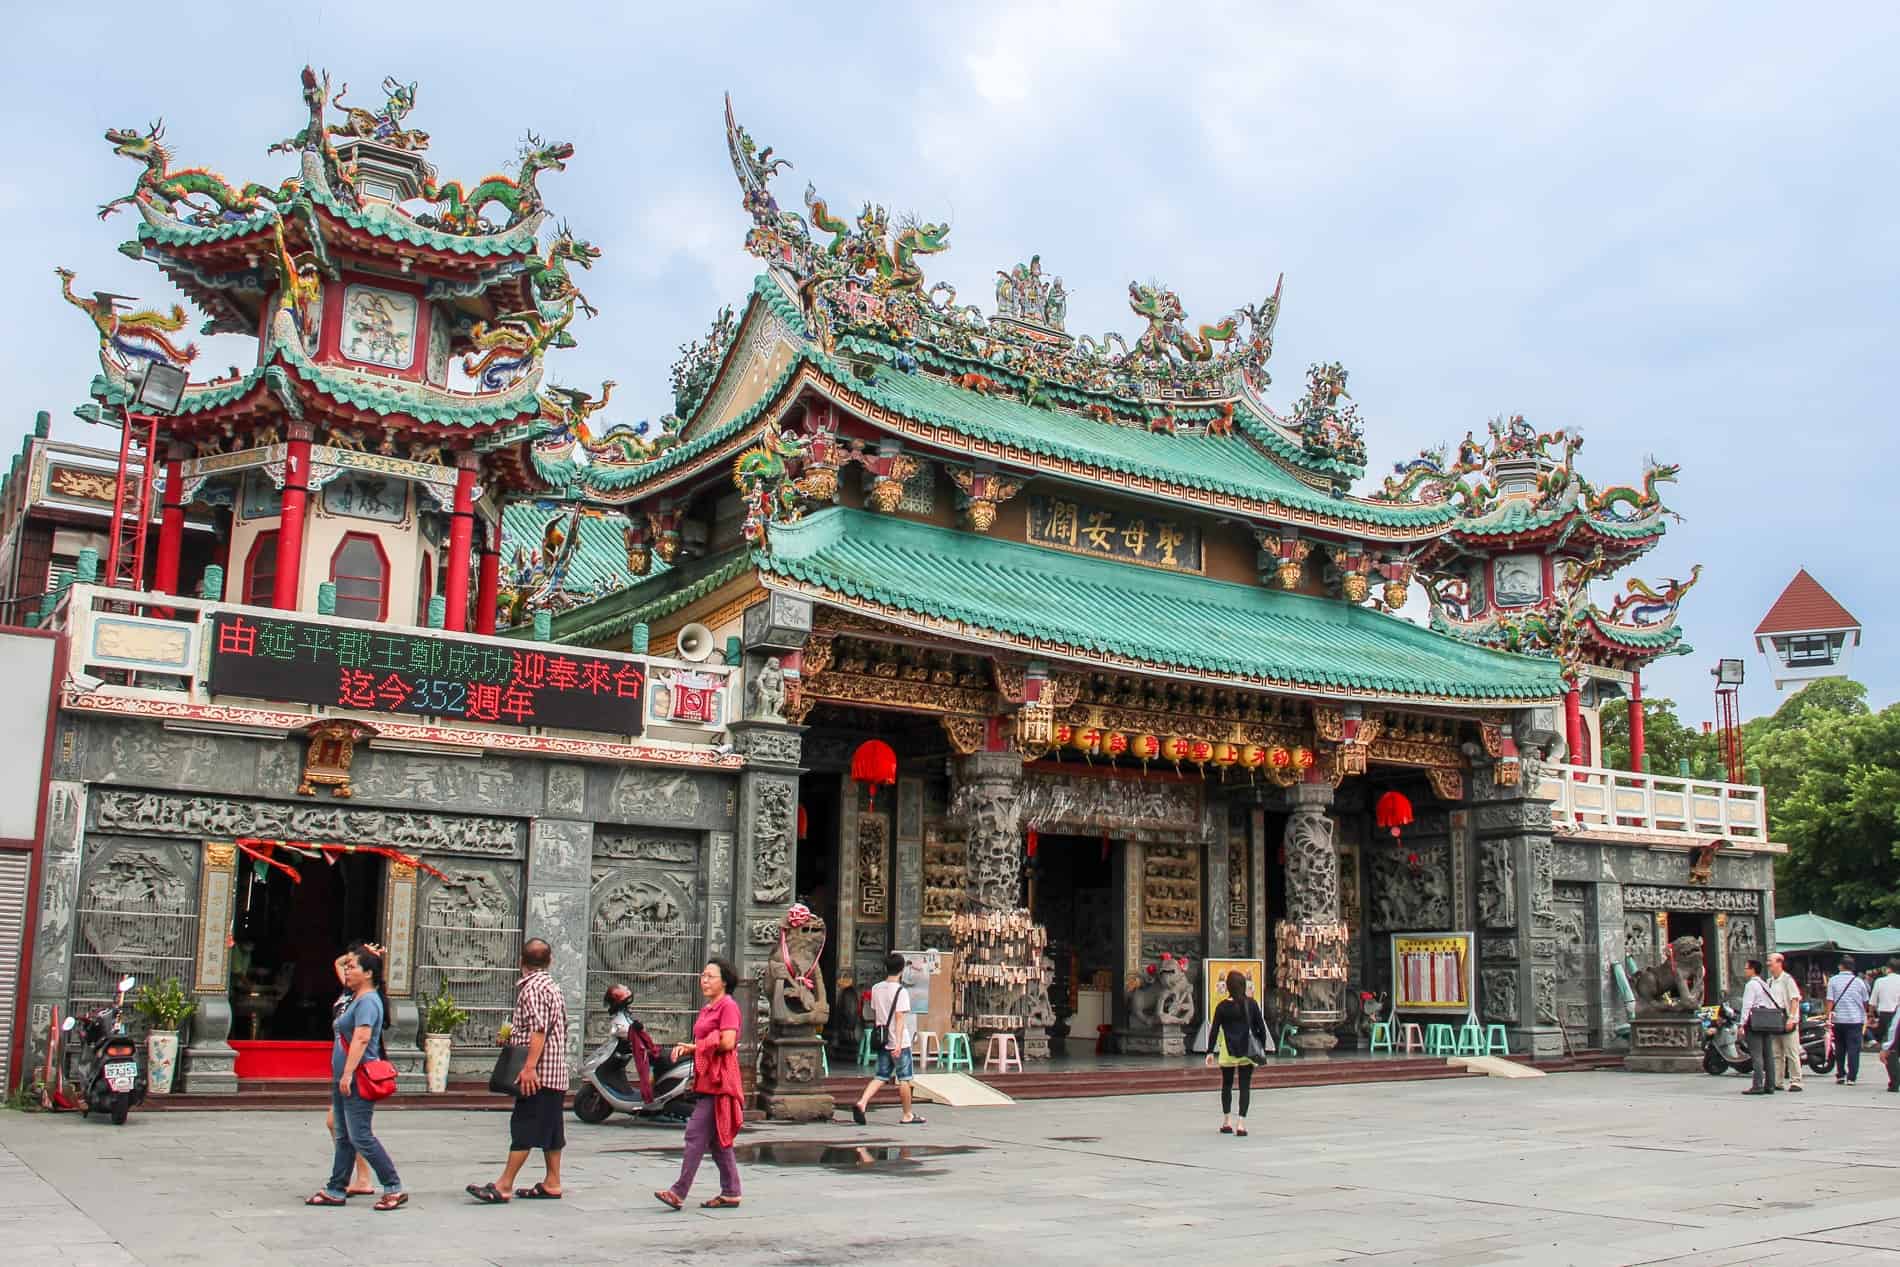 The intricate stone carvings, red columns and mint-green pagada roofs of the Anping Kaitai Tianhou Matsu Temple in Tainan. 